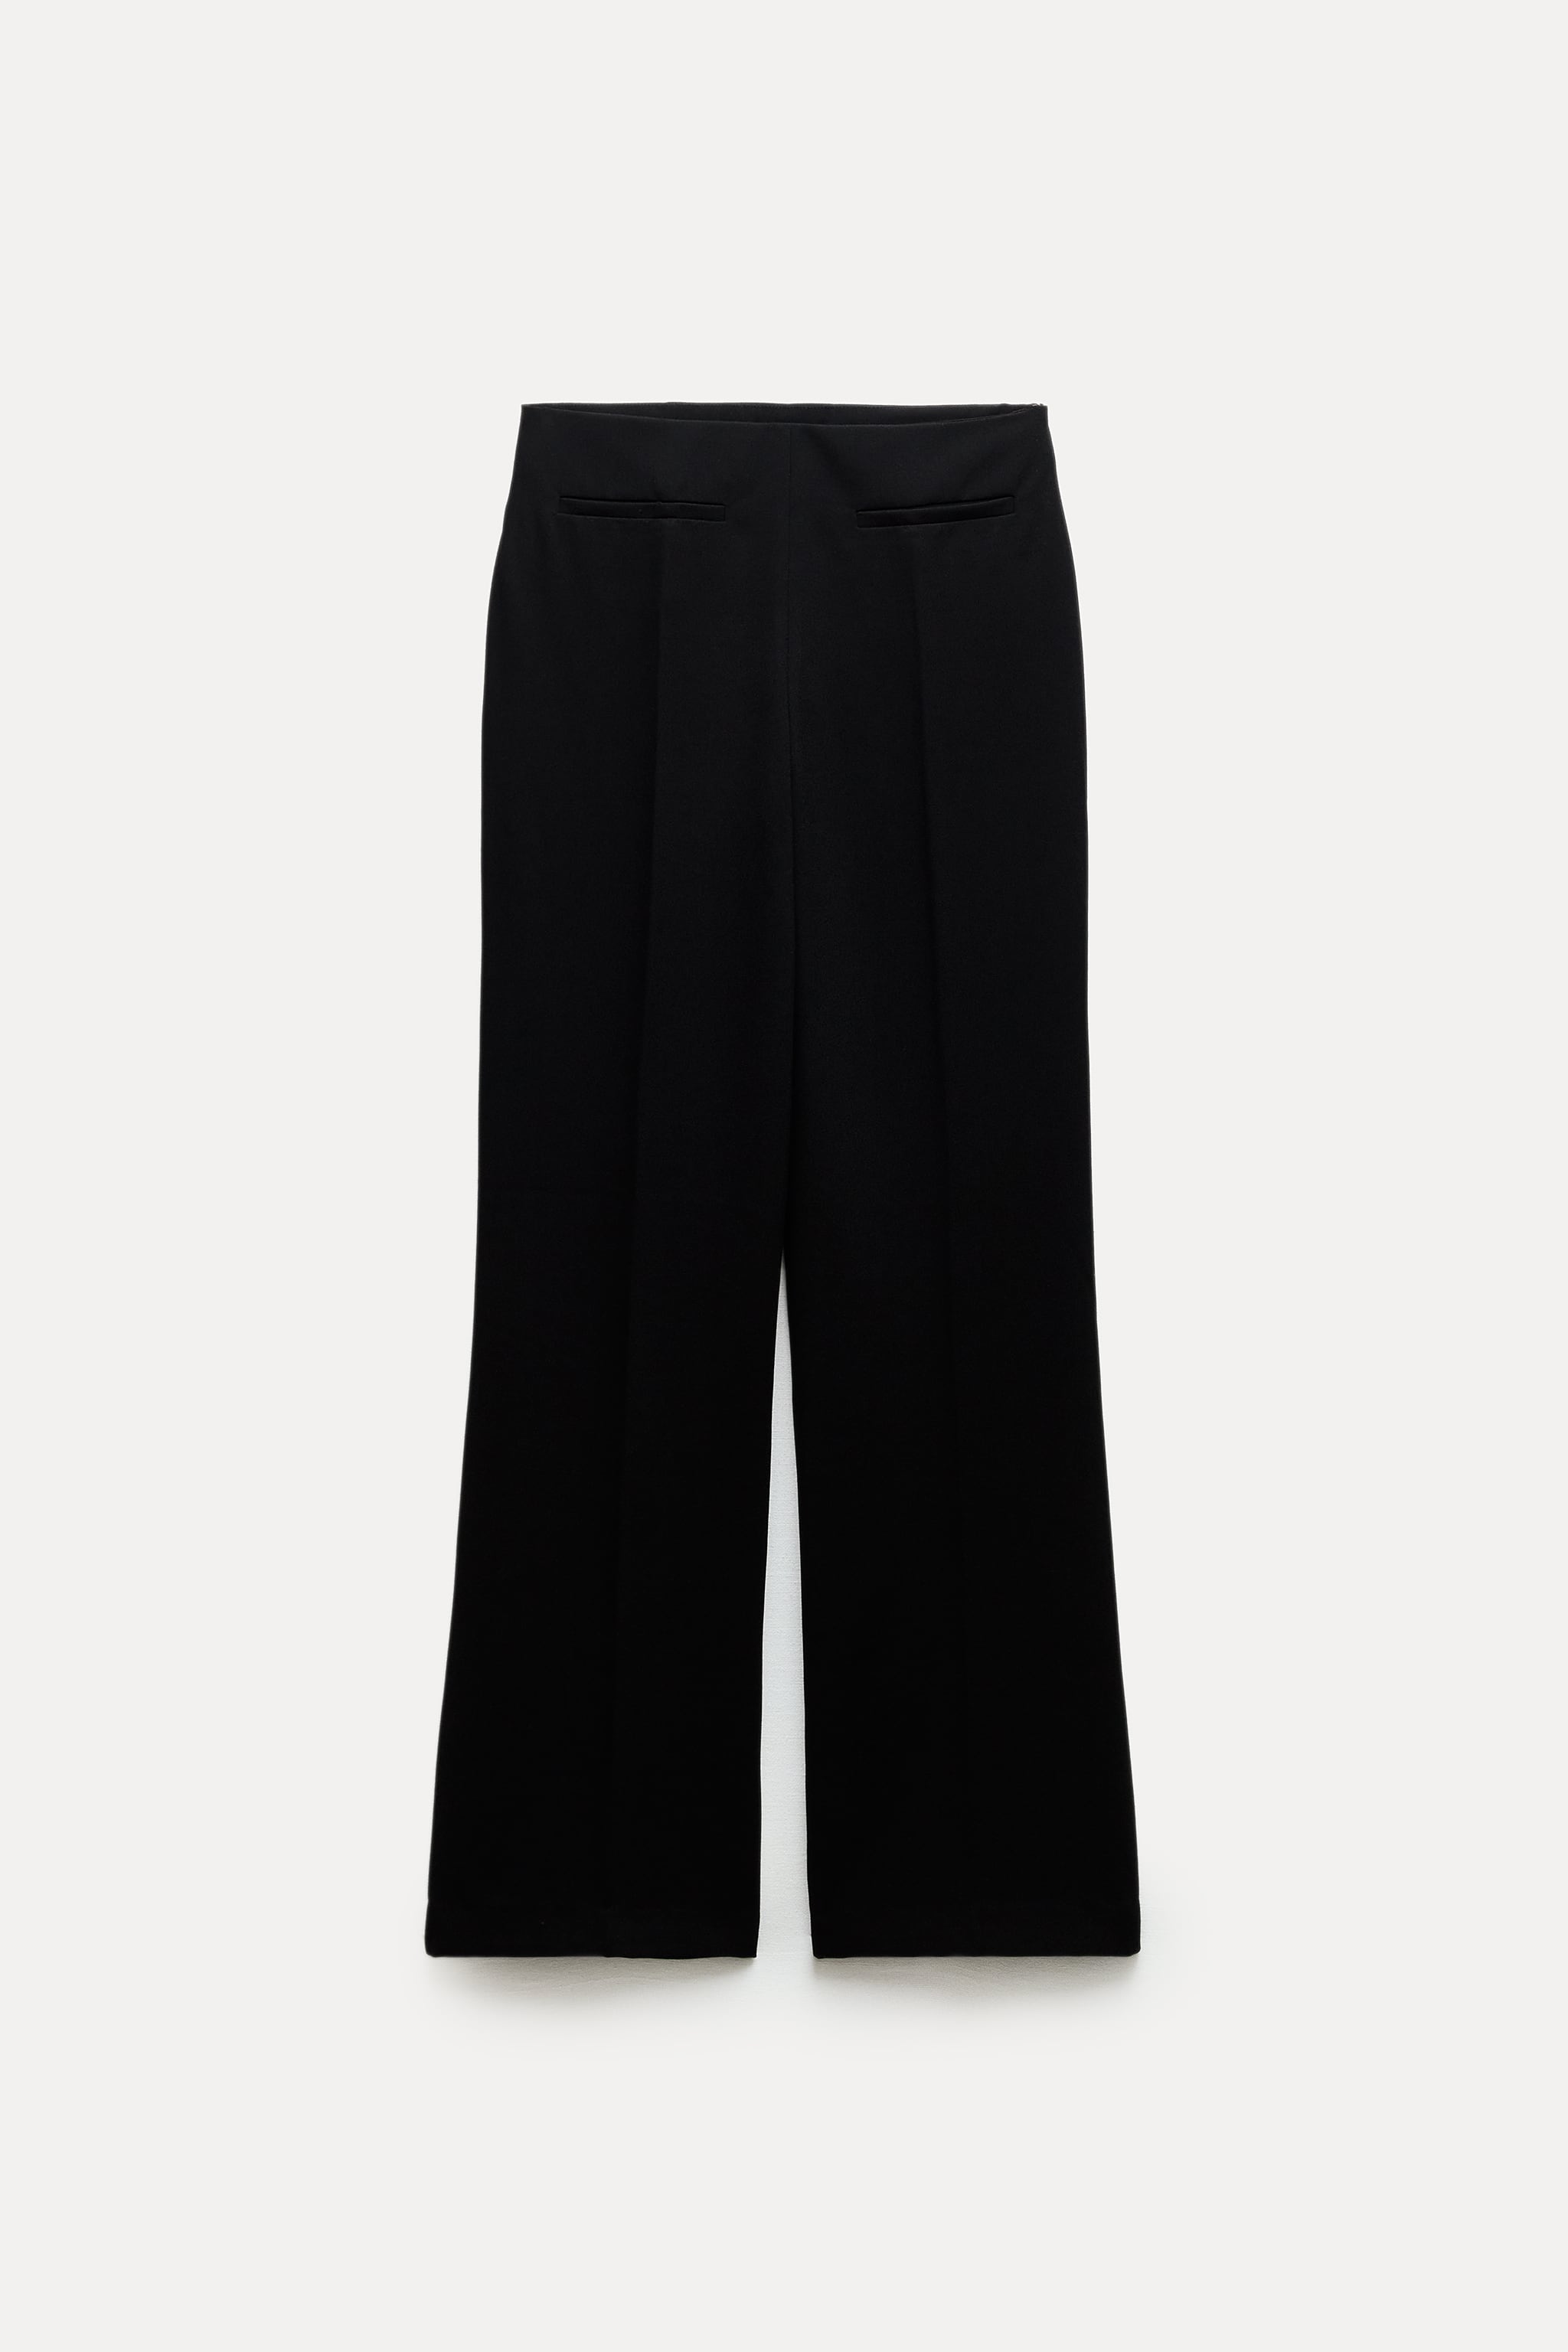 FLARED POCKET PANTS ZW COLLECTION